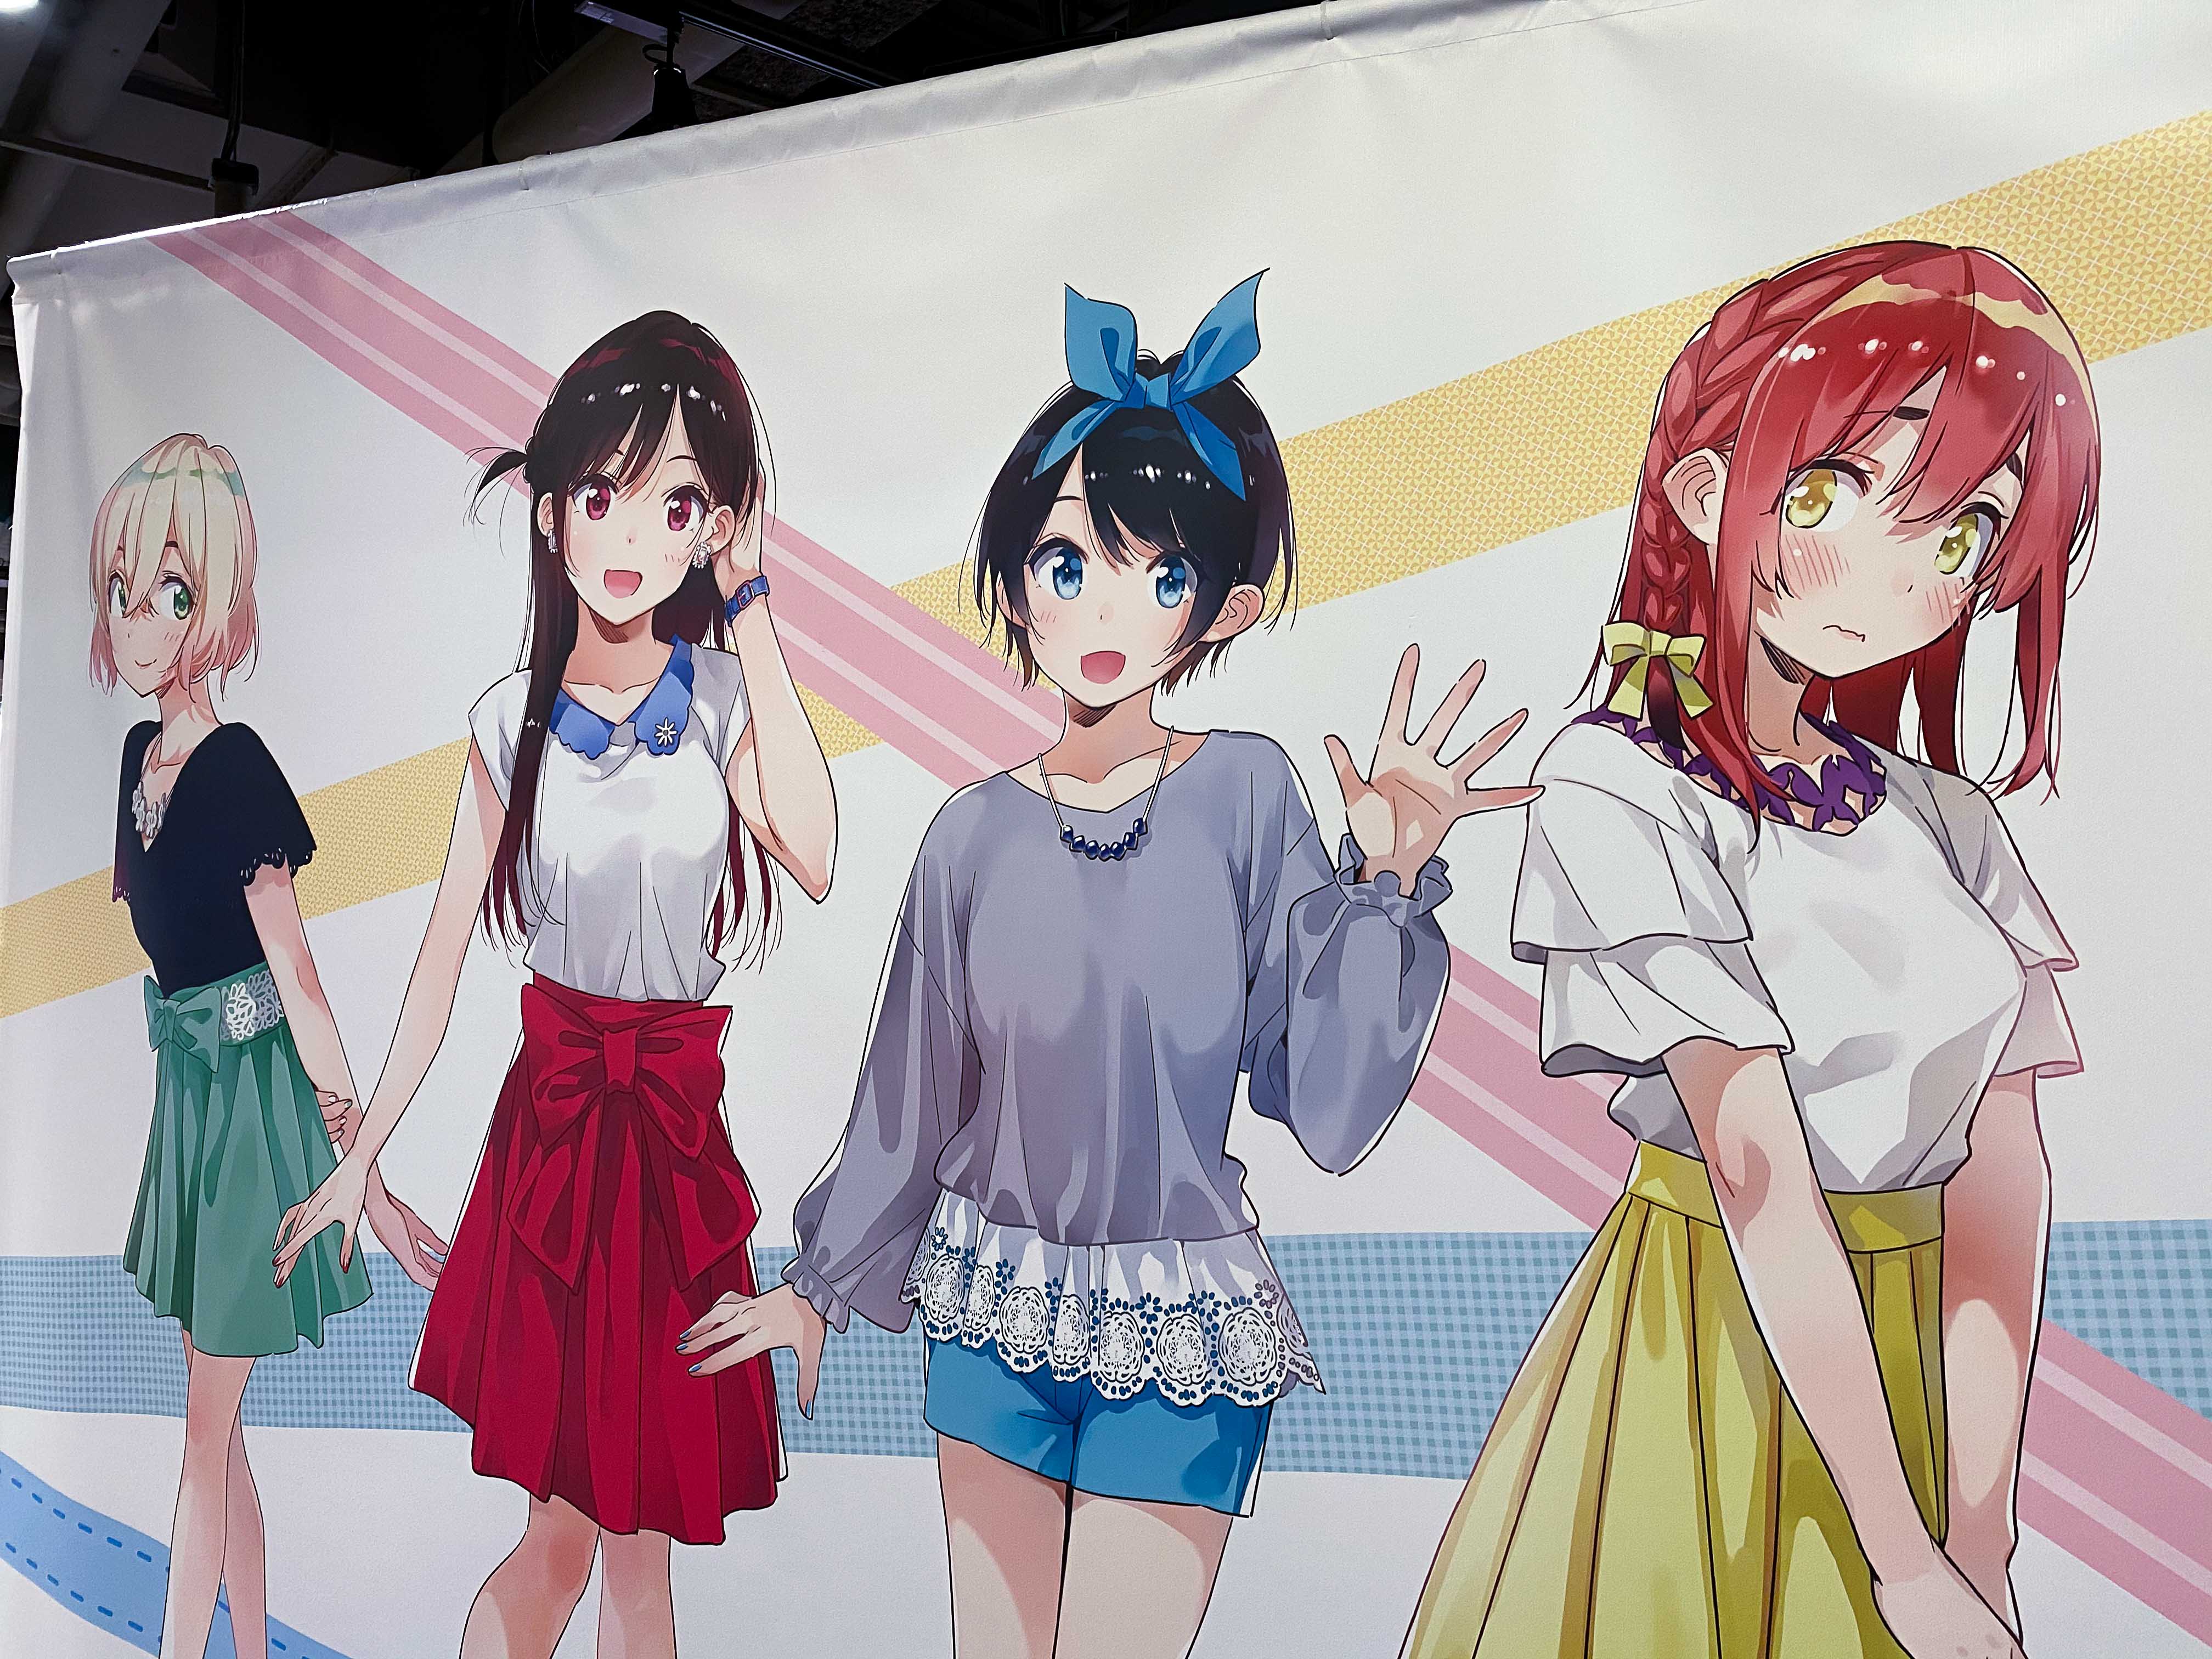 Crunchyroll - EVENT REPORT: Going on a Date With Chizuru to the Rent-a- Girlfriend Exhibition in Tokyo